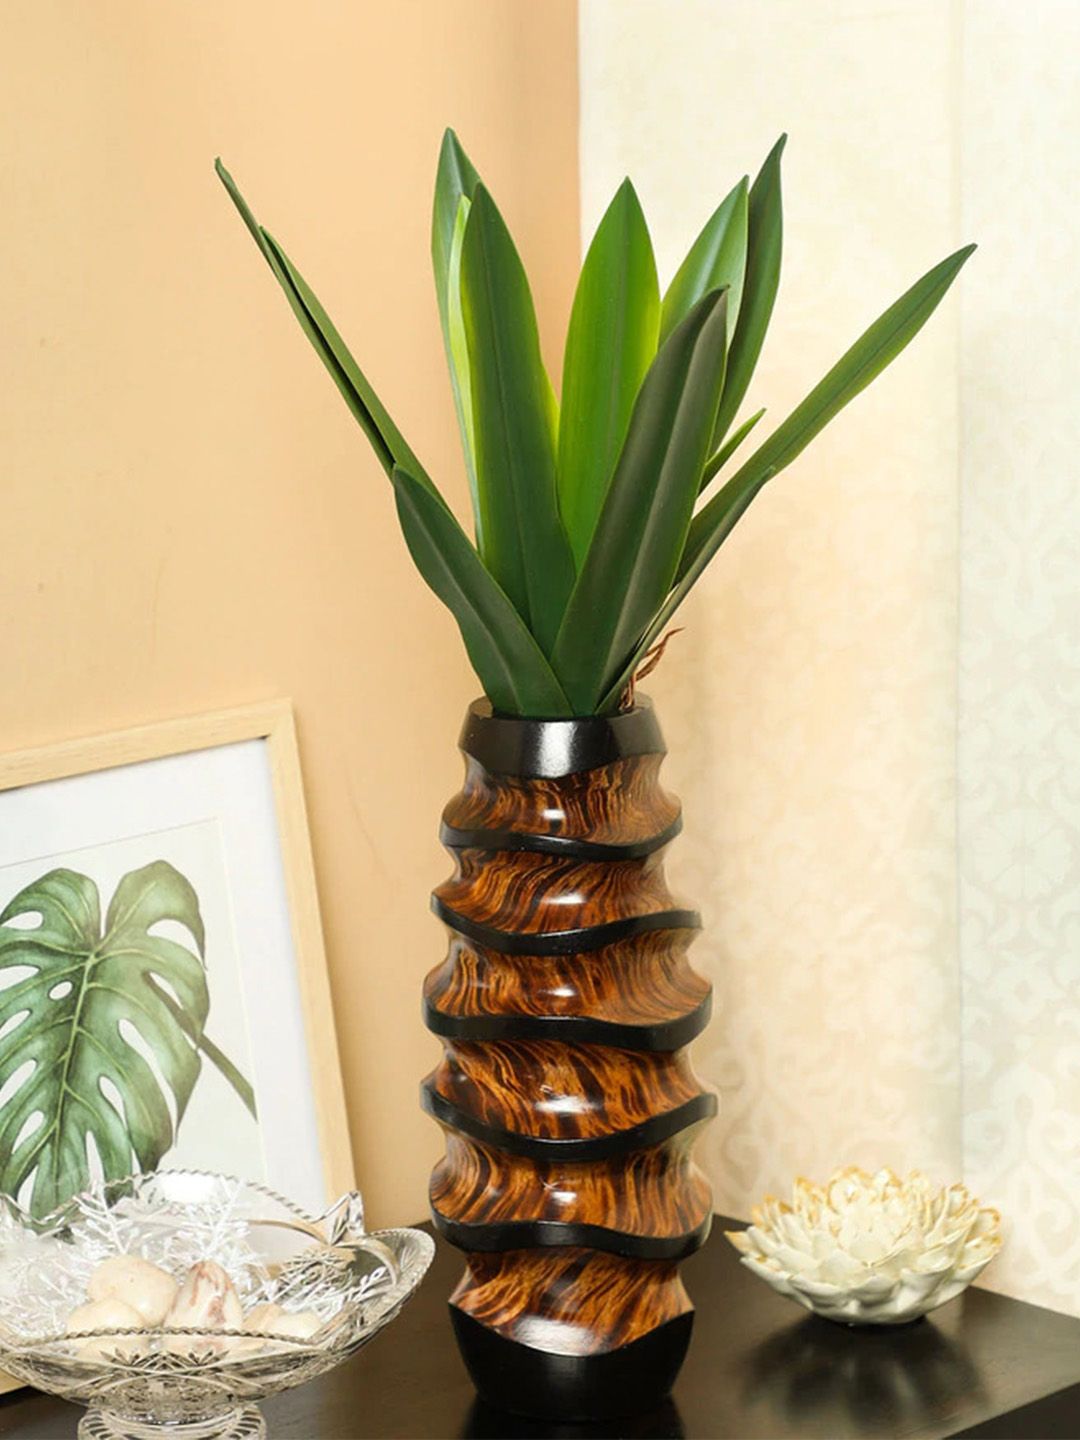 PolliNation Green Real Touch Dracaena Plant Price in India